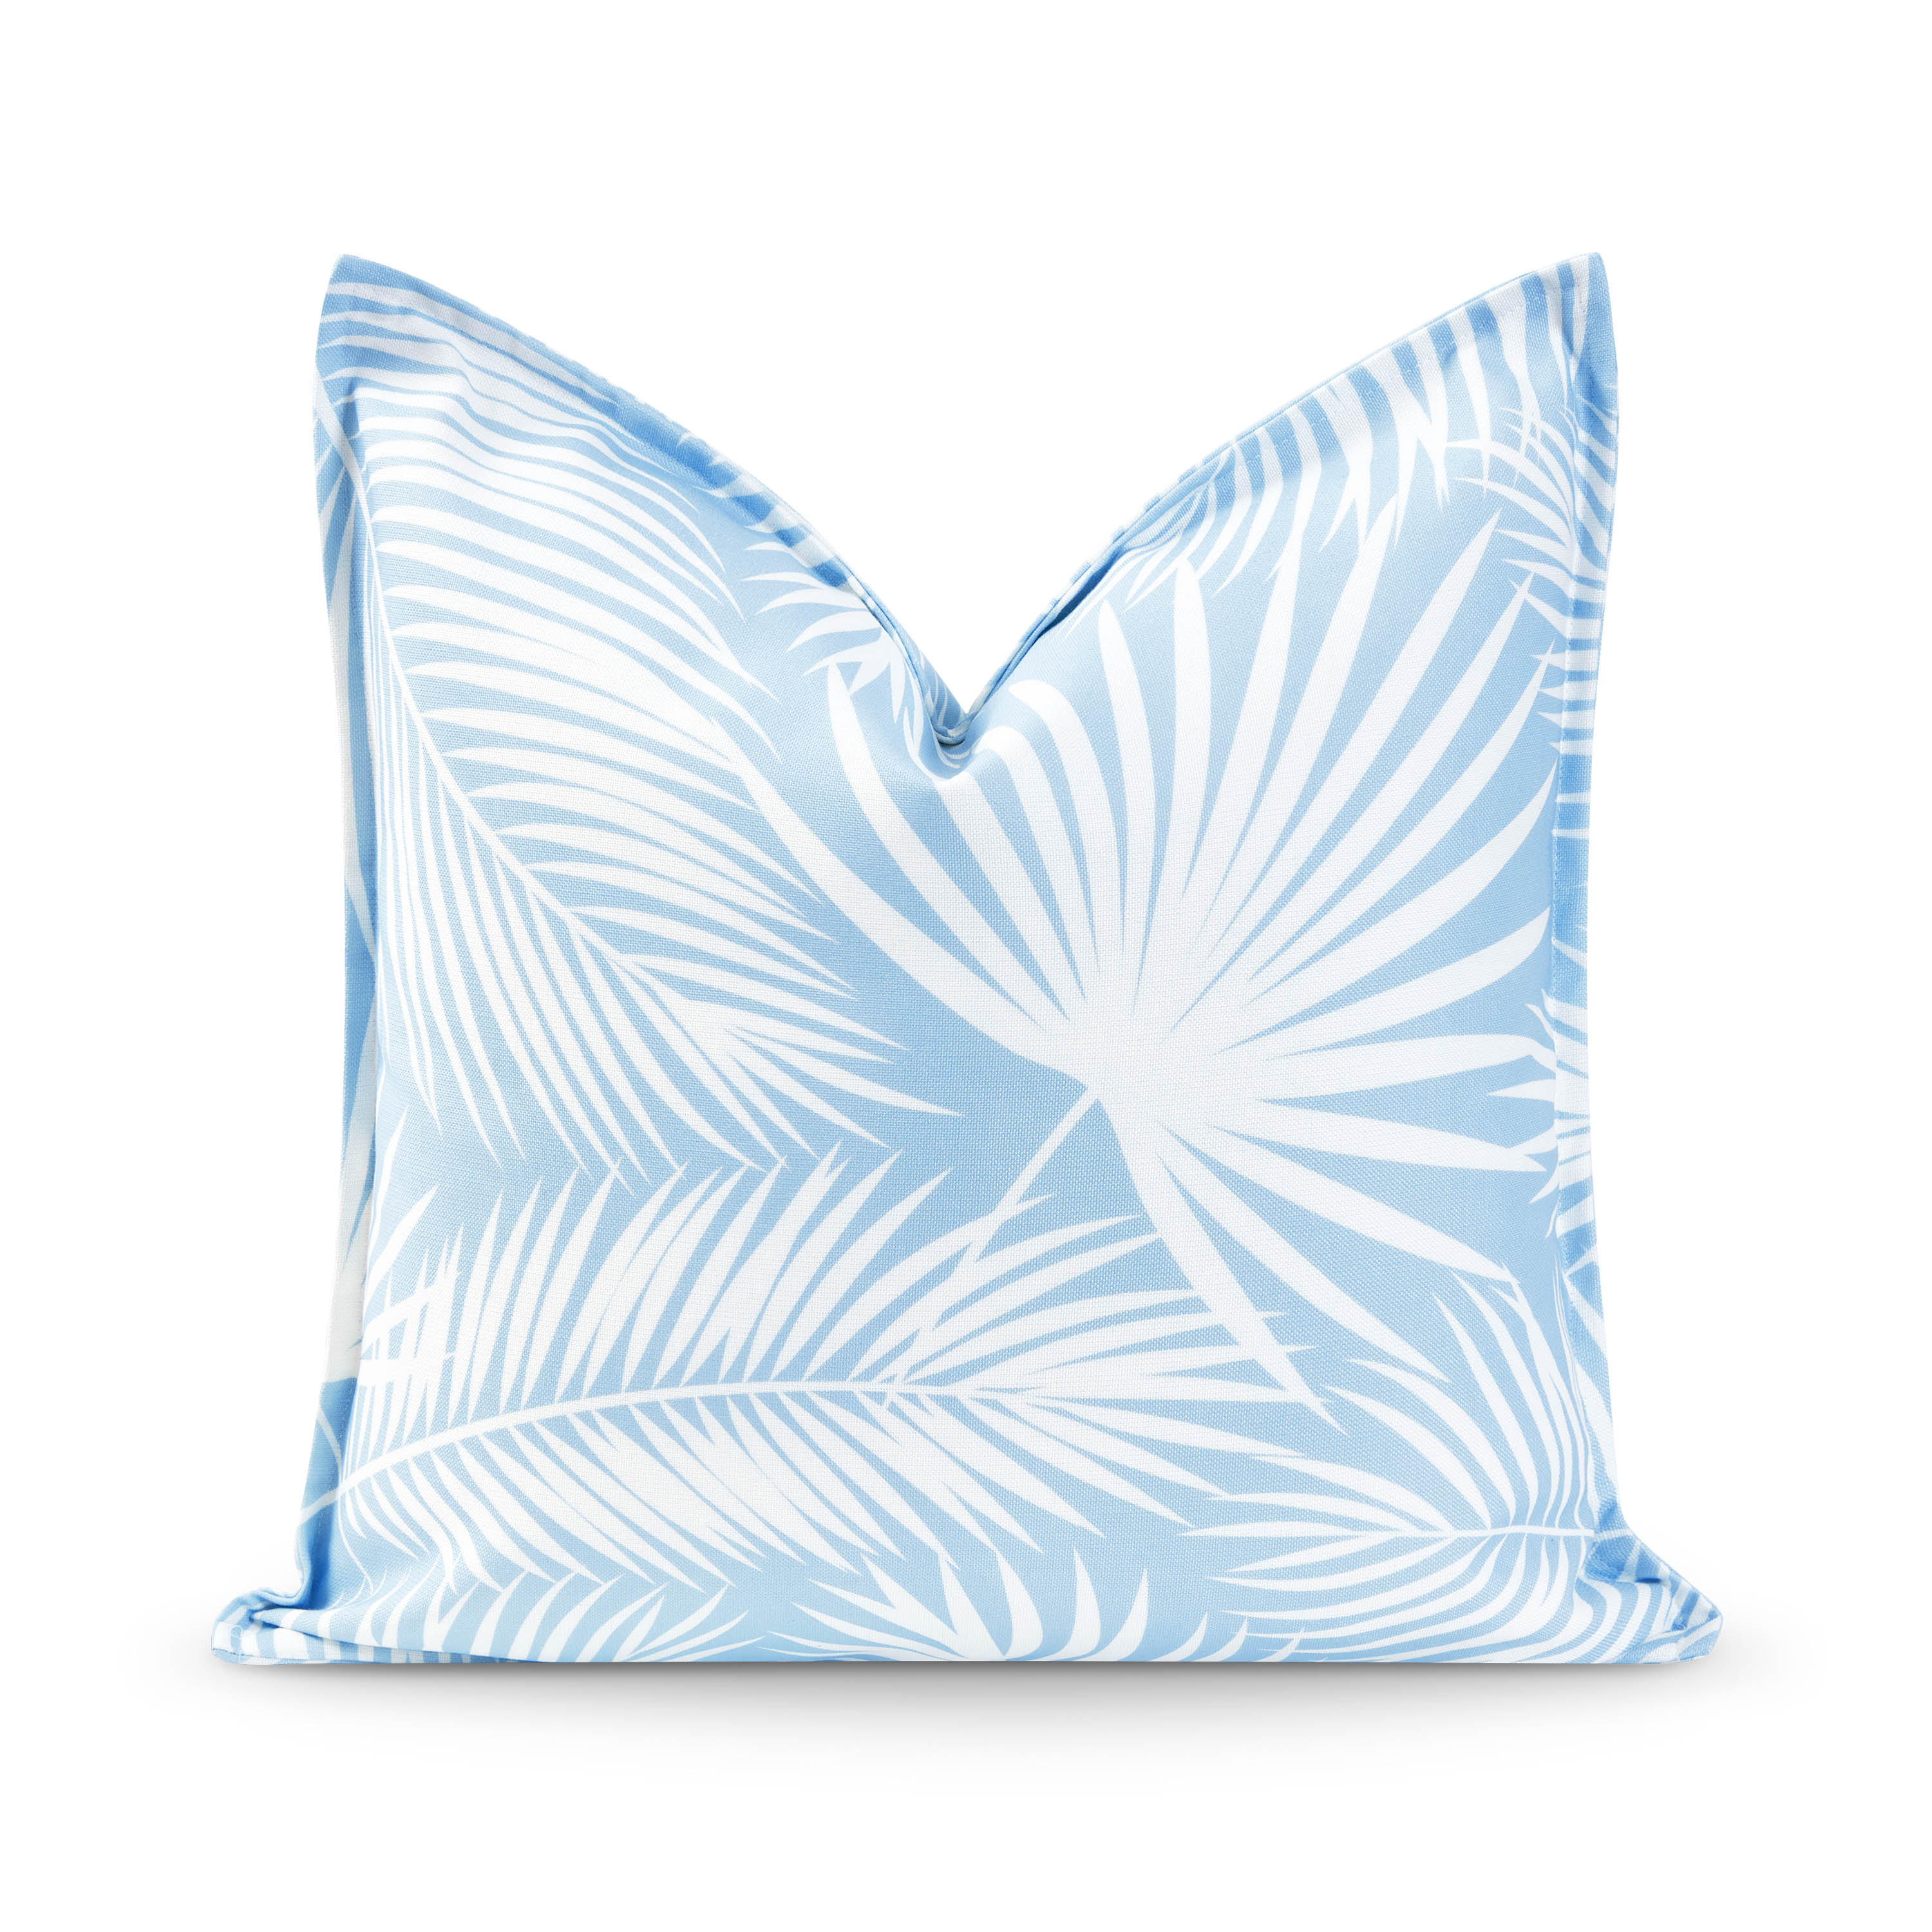 Coastal Hampton Style Indoor Outdoor Pillow Cover, Palm Leaf, Baby Blue, 20"x20"